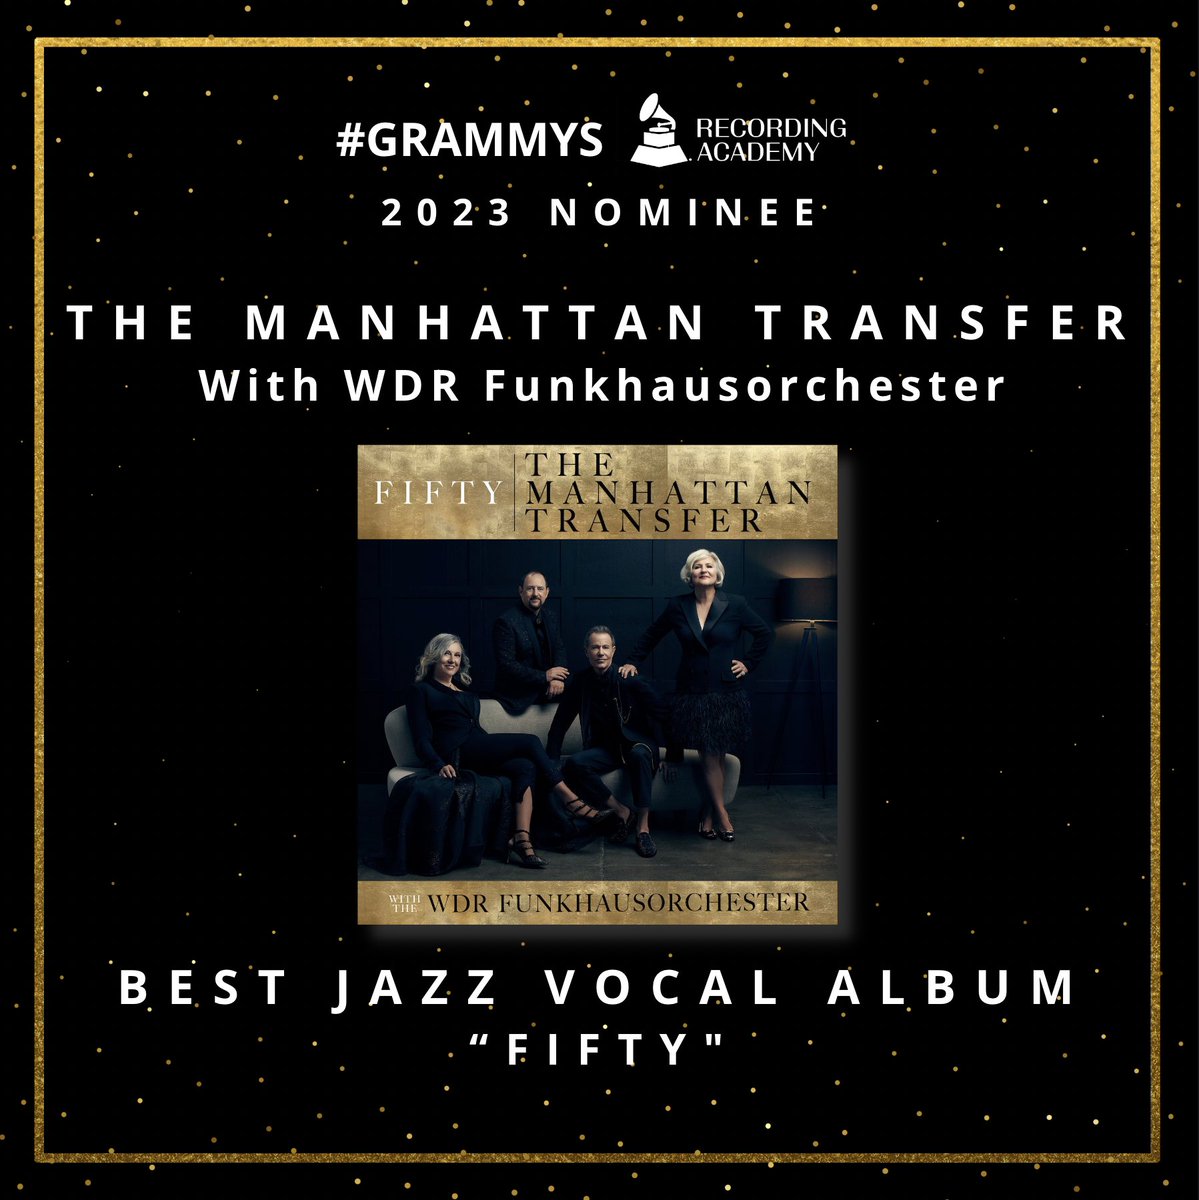 Thank you to the @RecordingAcad for nominating our new album FIFTY for Best Jazz Vocal Album at the 2023 GRAMMY Awards. It's an honor to be nominated again in our fiftieth year! Congratulations to all the nominees. #GRAMMYs